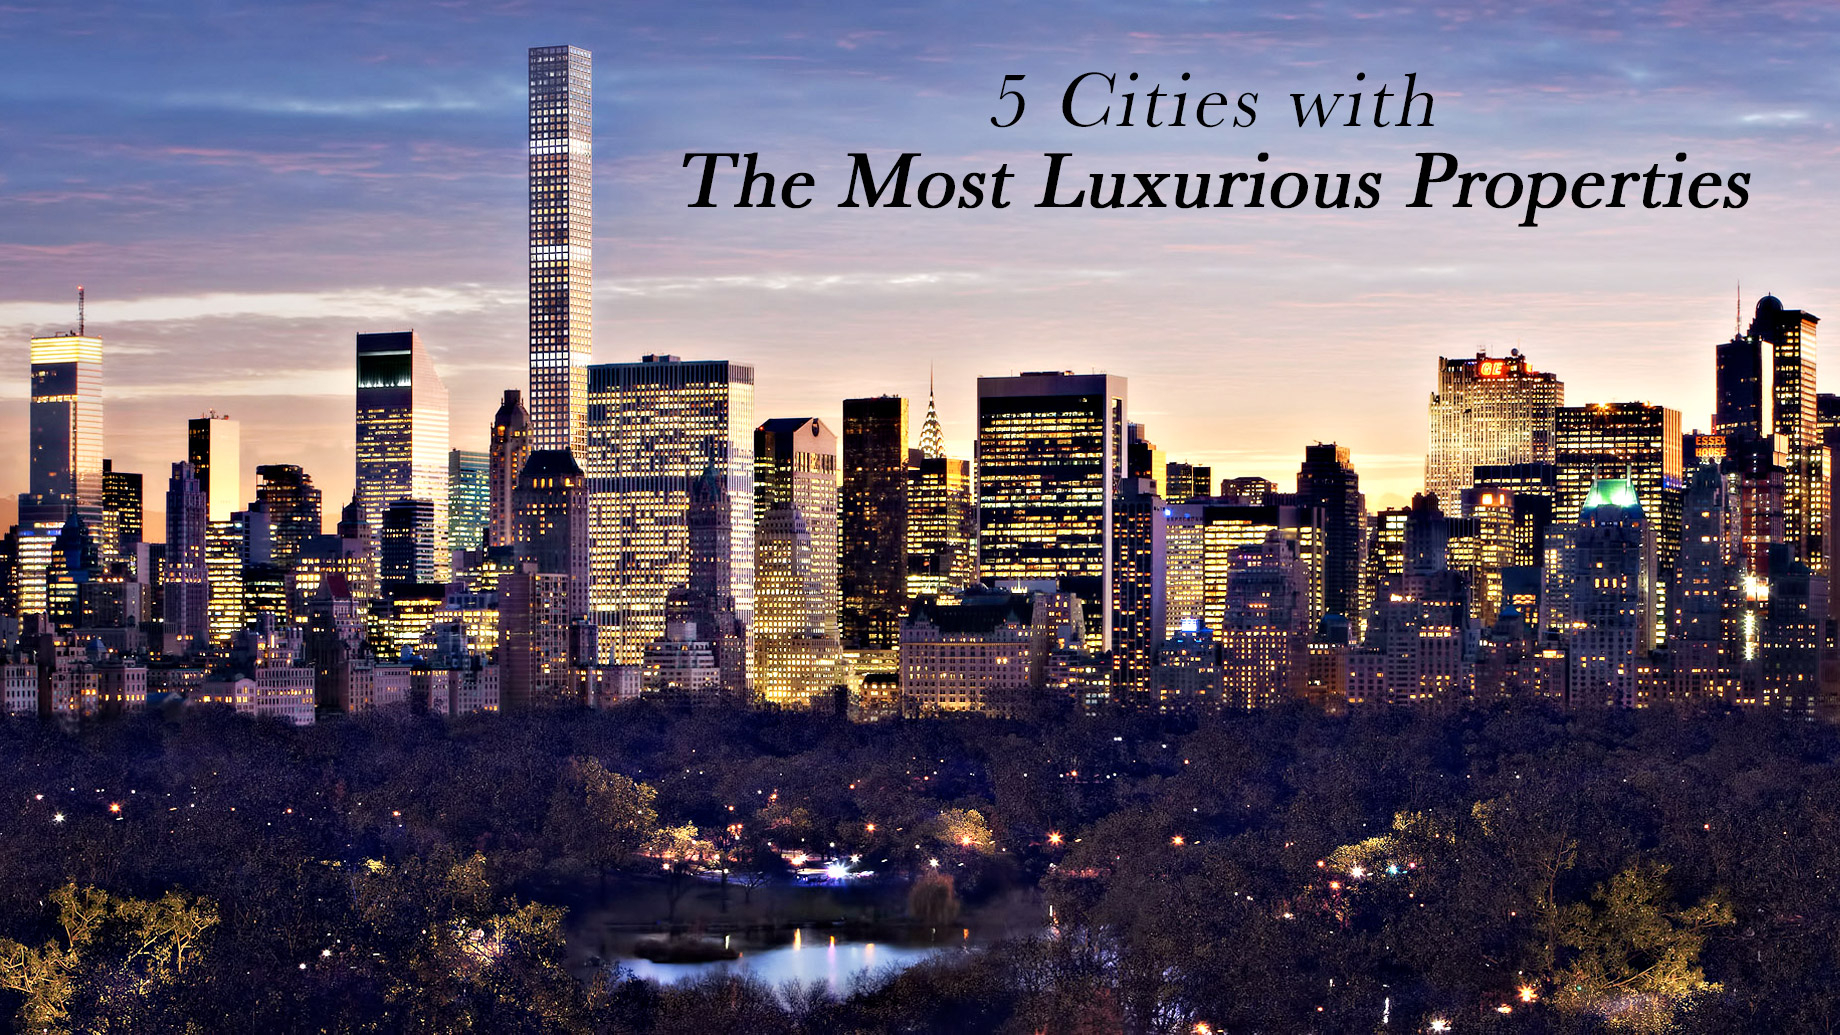 5 Cities with The Most Luxurious Properties